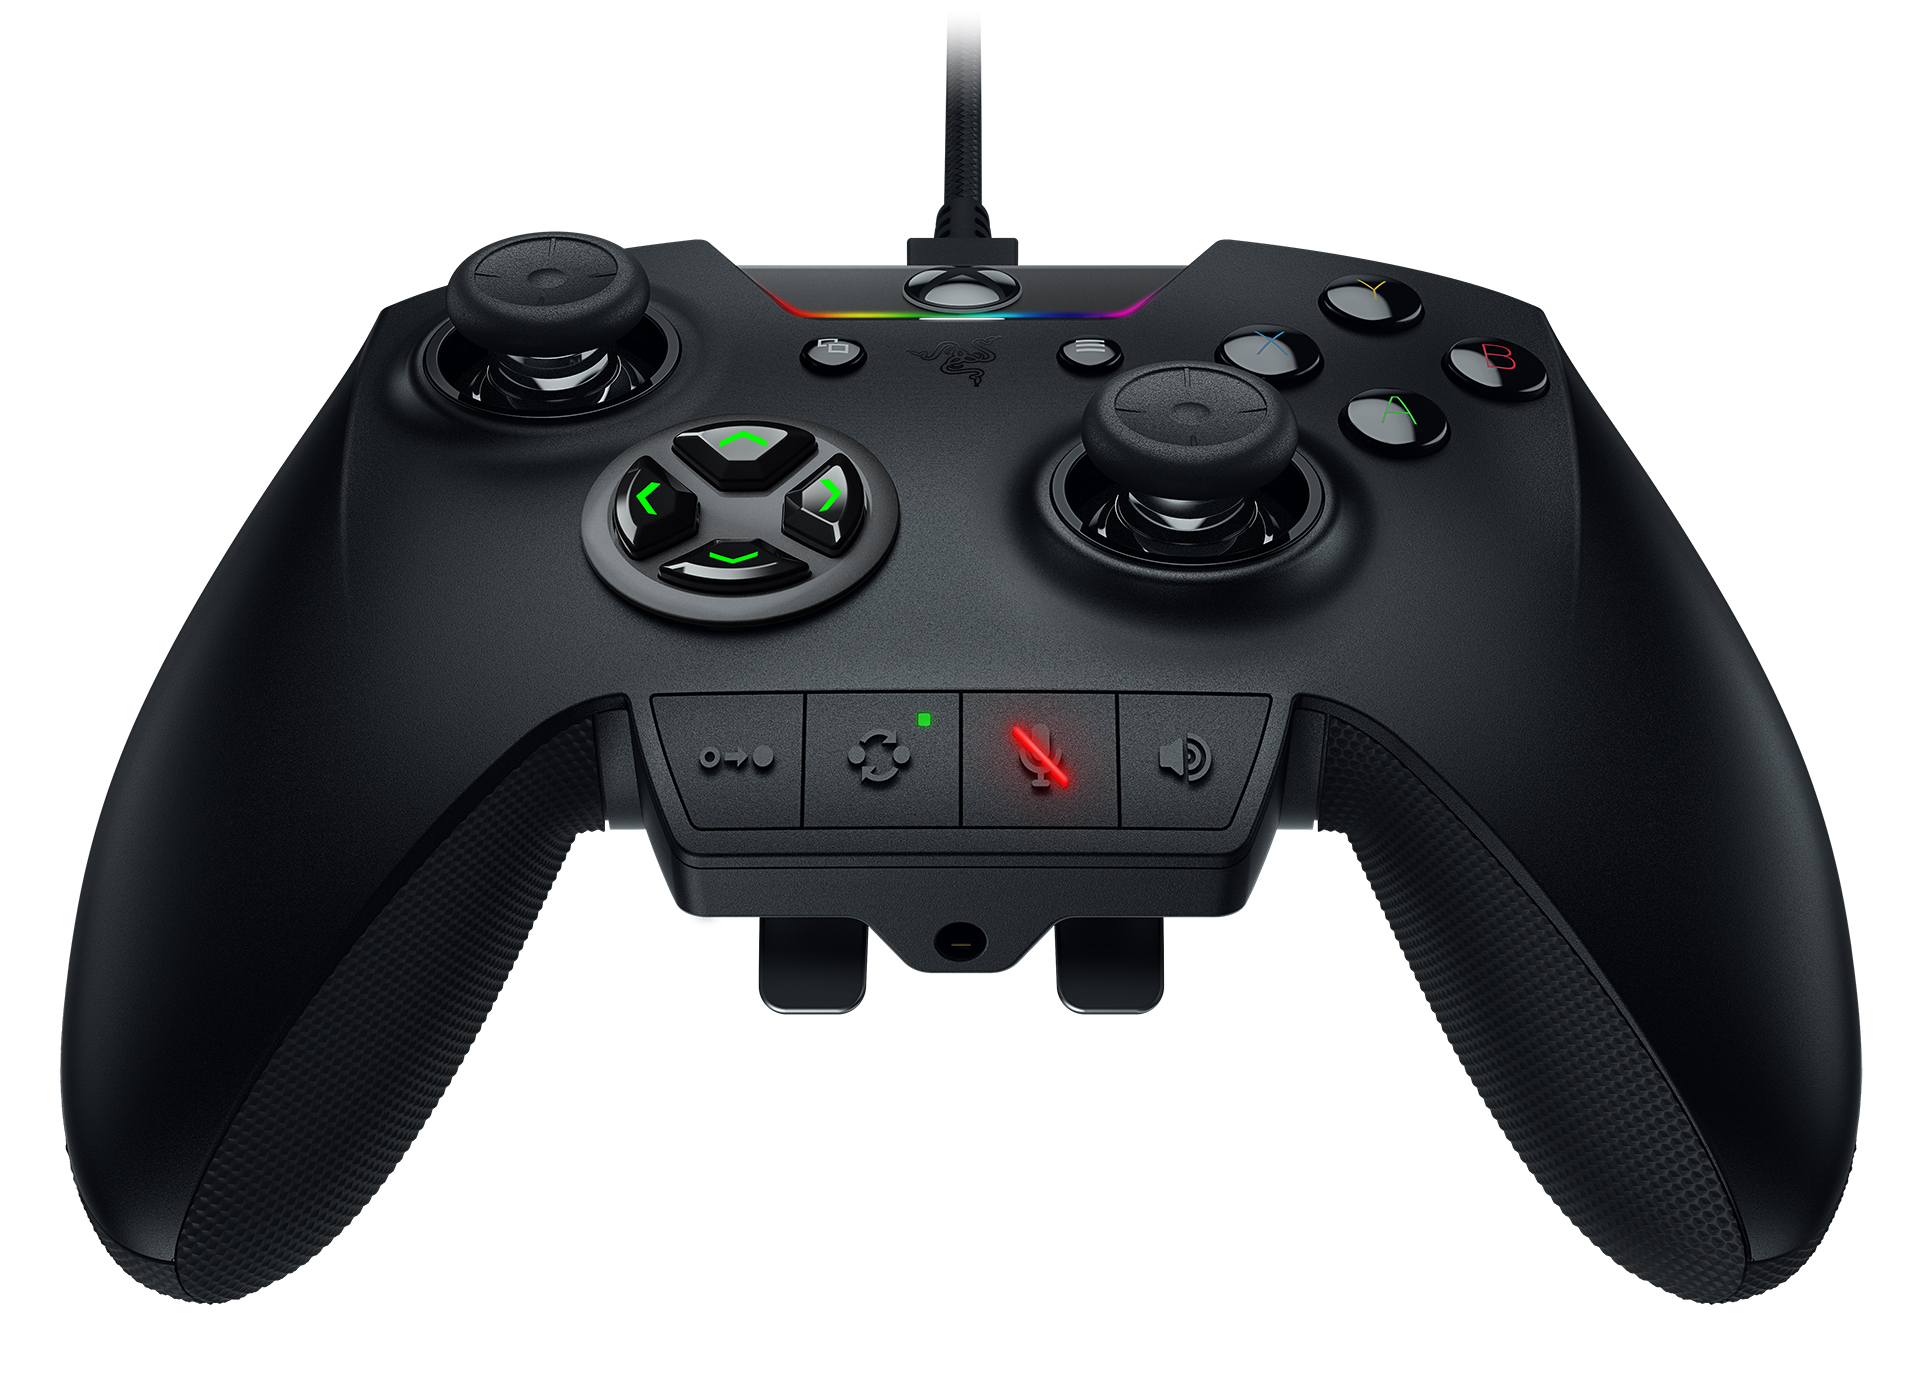 Razer Calls Its Fancy New Controller The Wolverine